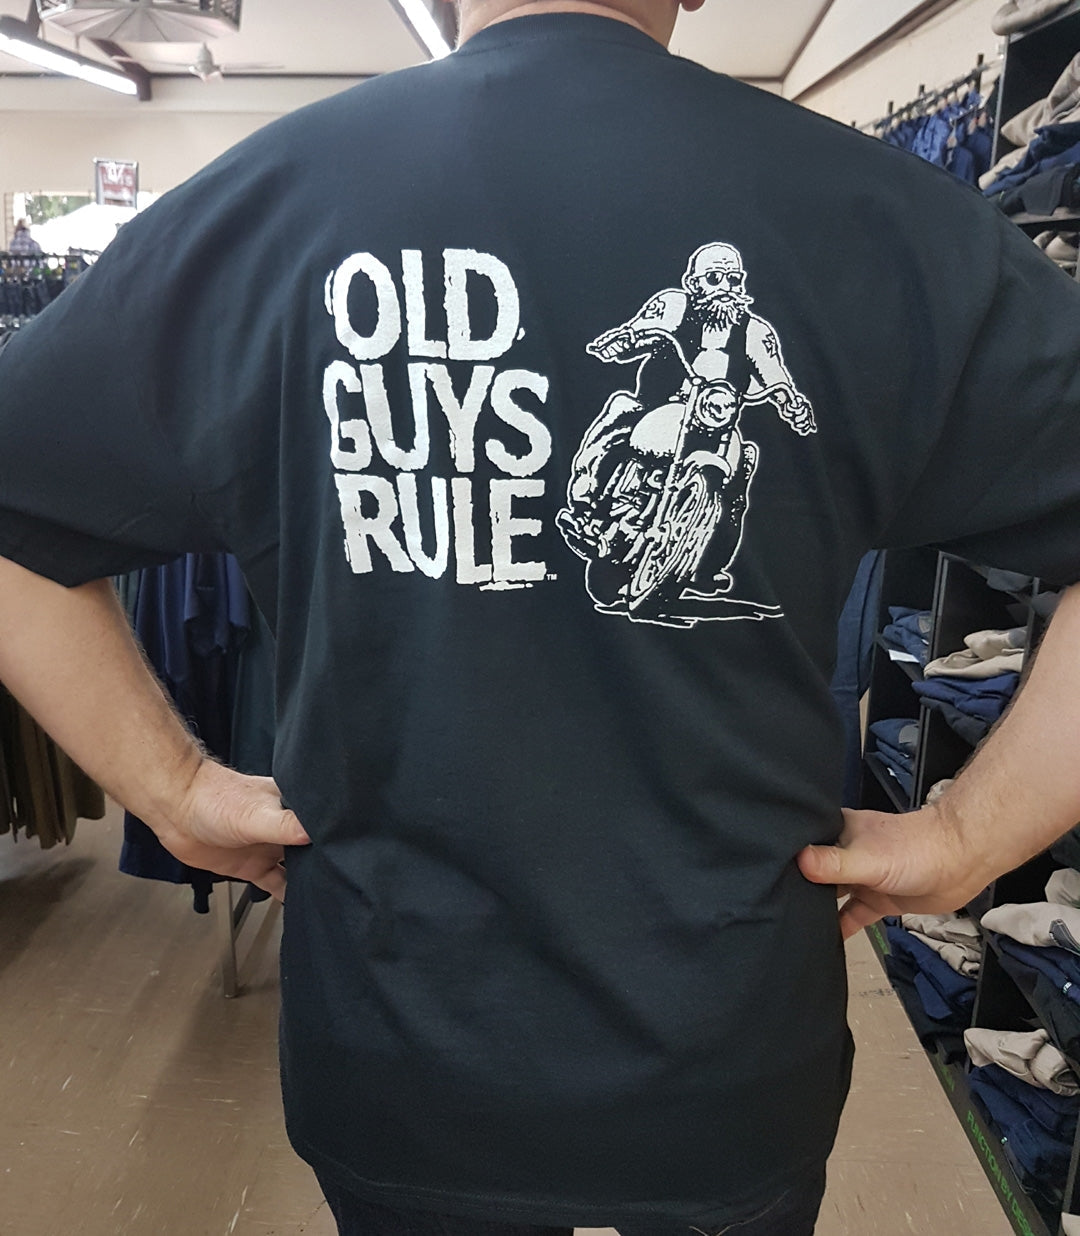 Classic Biker T-Shirt by Old Guys Rule - OGR